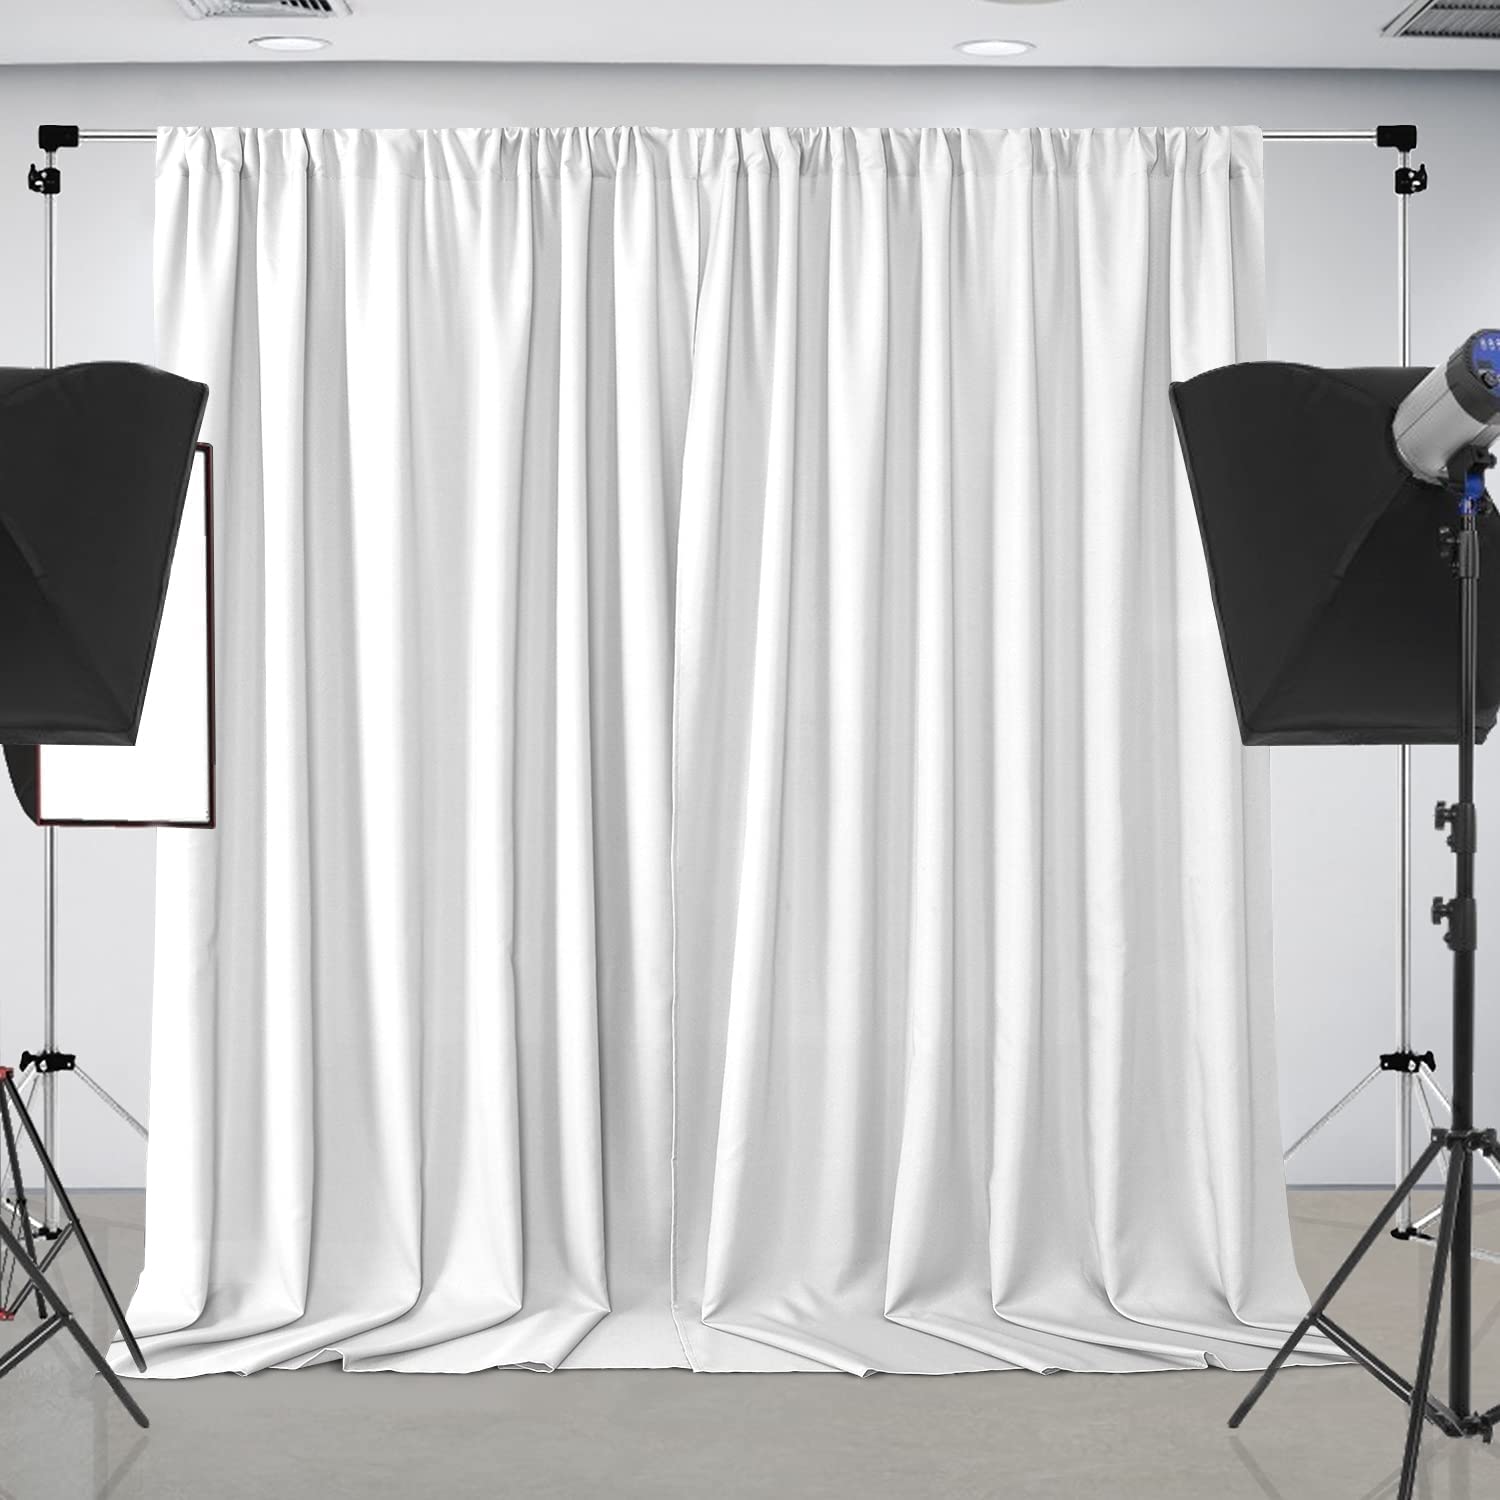 Joydeco White Backdrop Curtains for Wedding Parties, Photography Backdrop Drapes for Wedding Decorations Birthday, Wrinkle Free Polyester 5ft x 10ft Fabric Drape 2 Panels with Rod Pockets